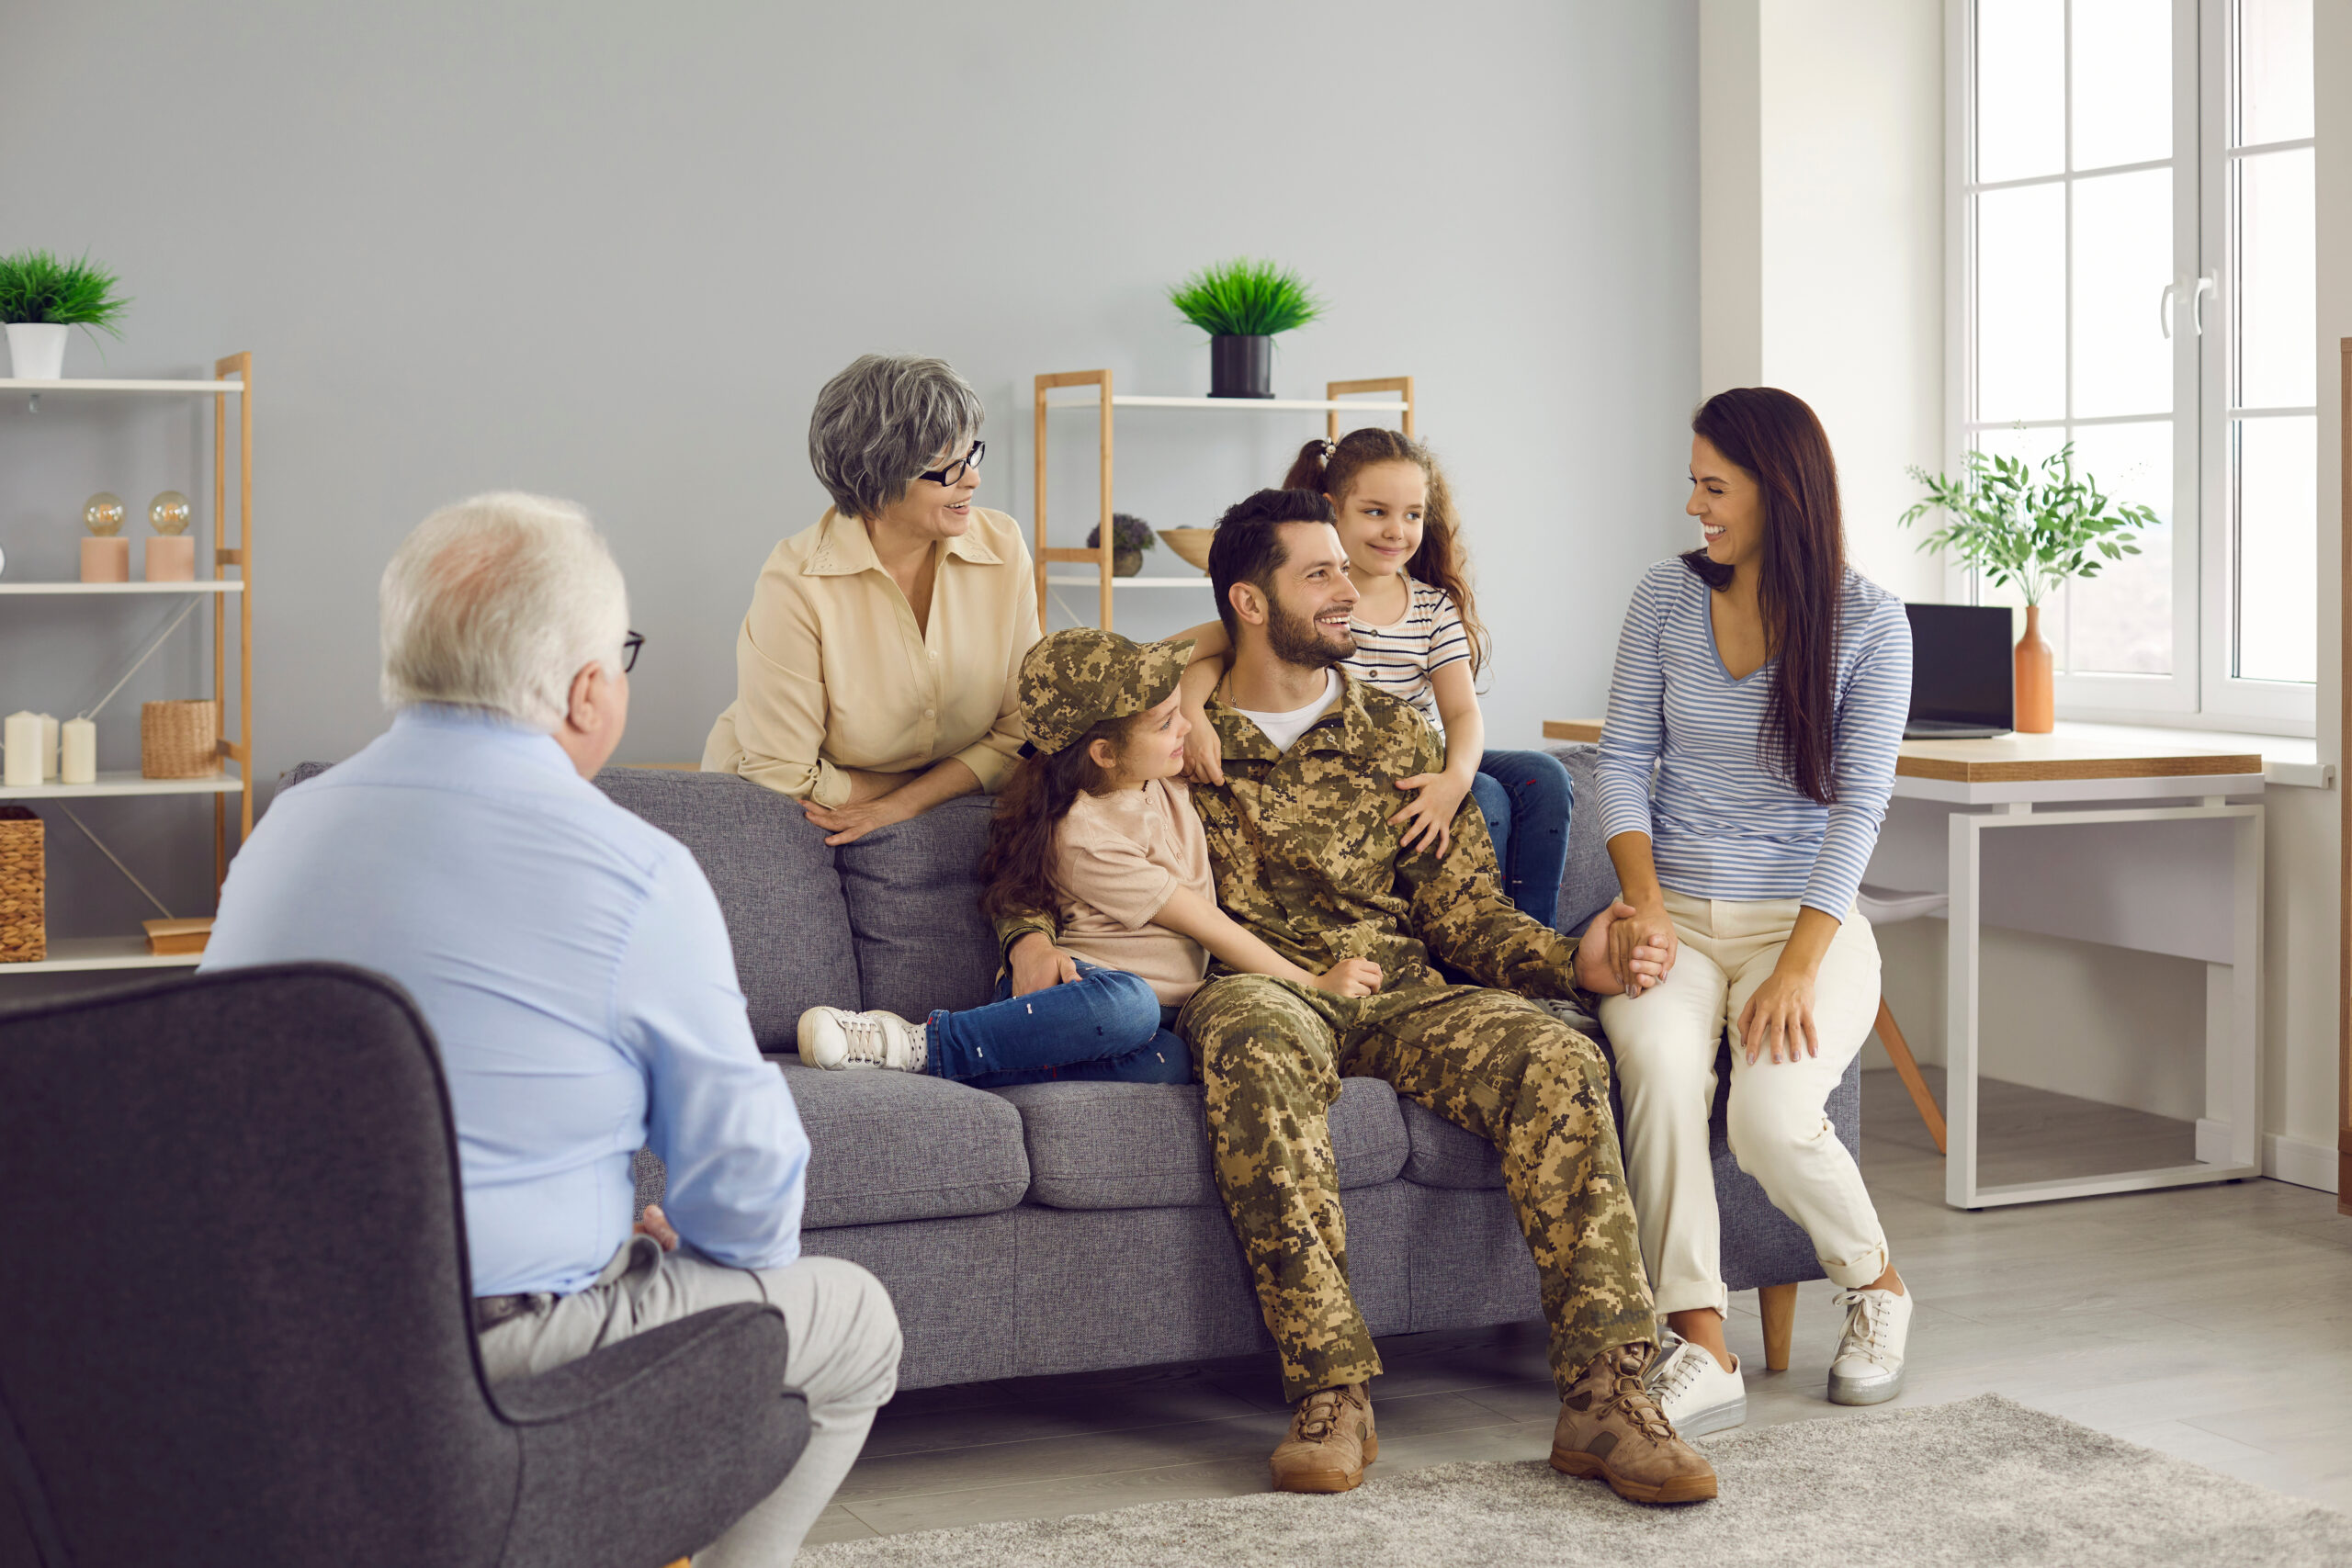 Returning to the family. Happy soldier man is talking with his family after returning from military service sitting in the living room at home. Older parents, wife and children all rejoice together.